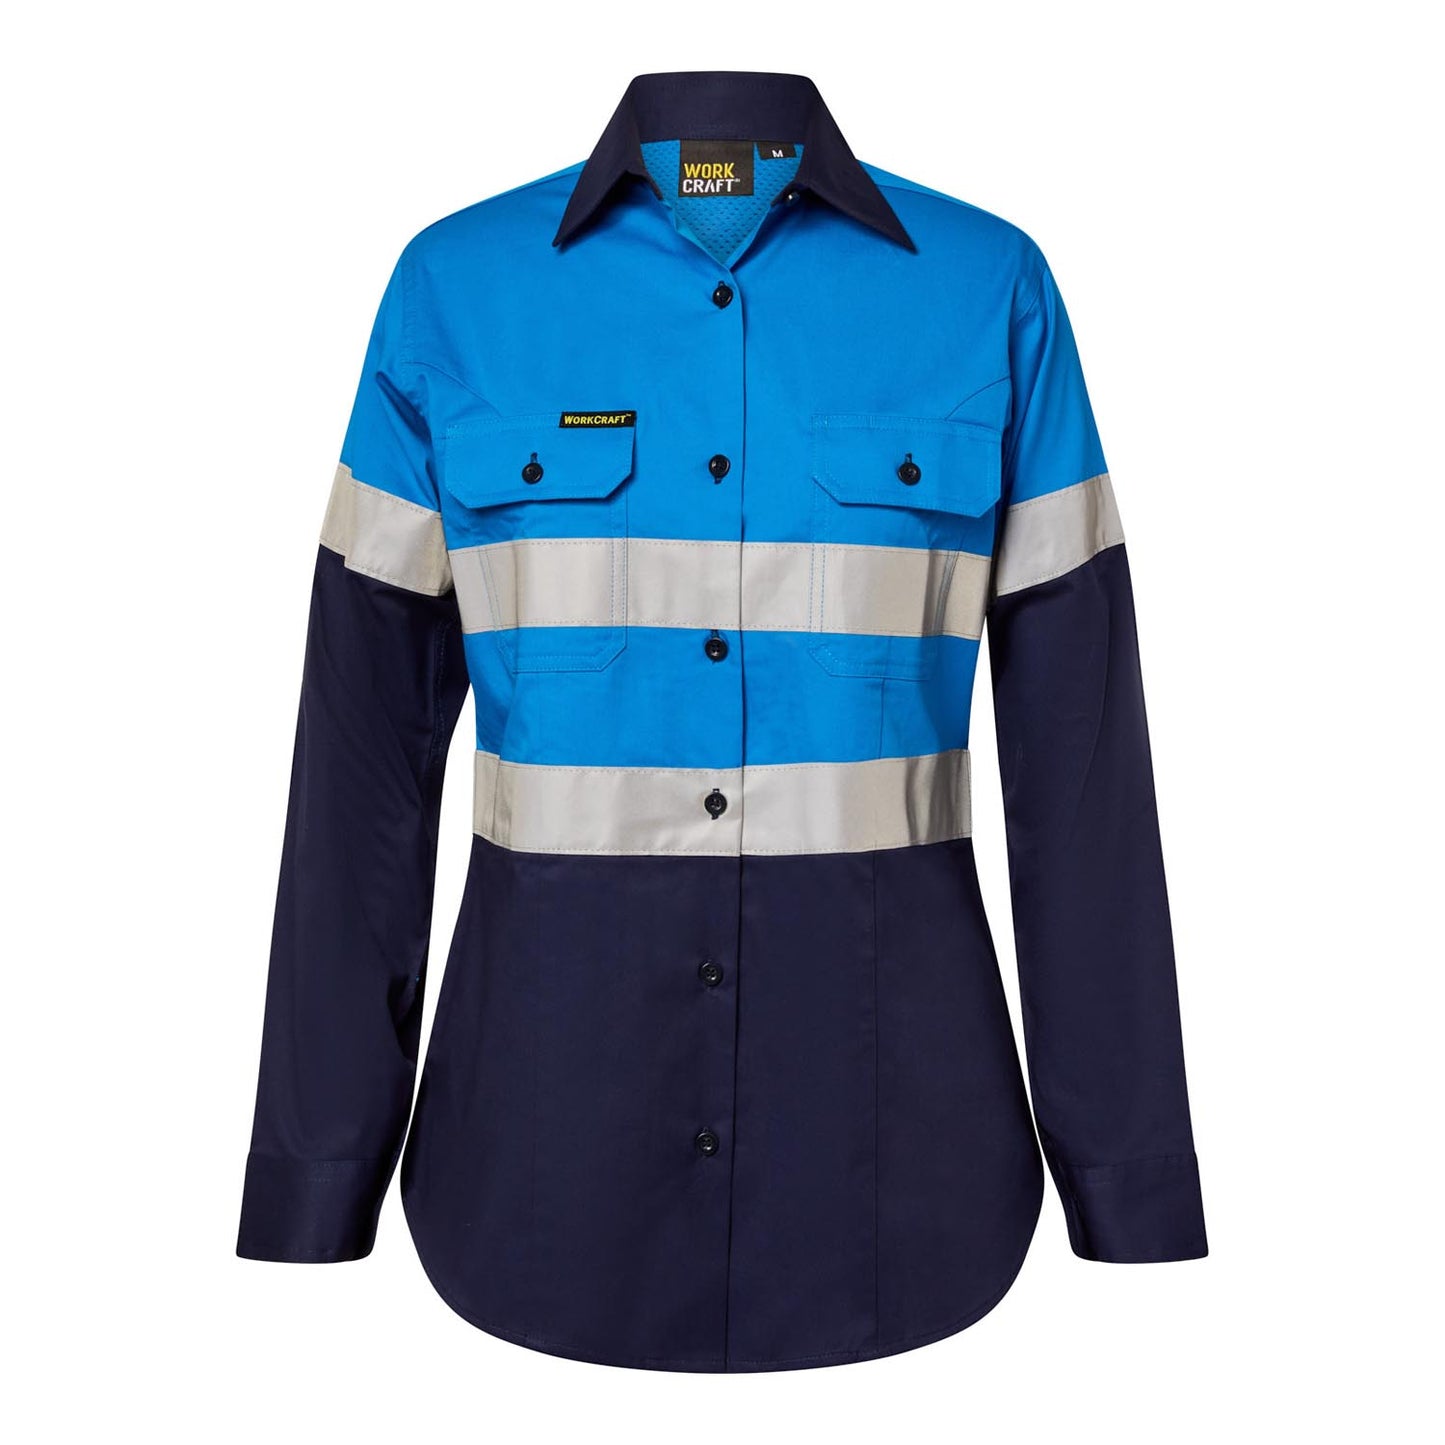 Ladies Hi Vis Long Sleeve Shirt With Tape - made by Workcraft